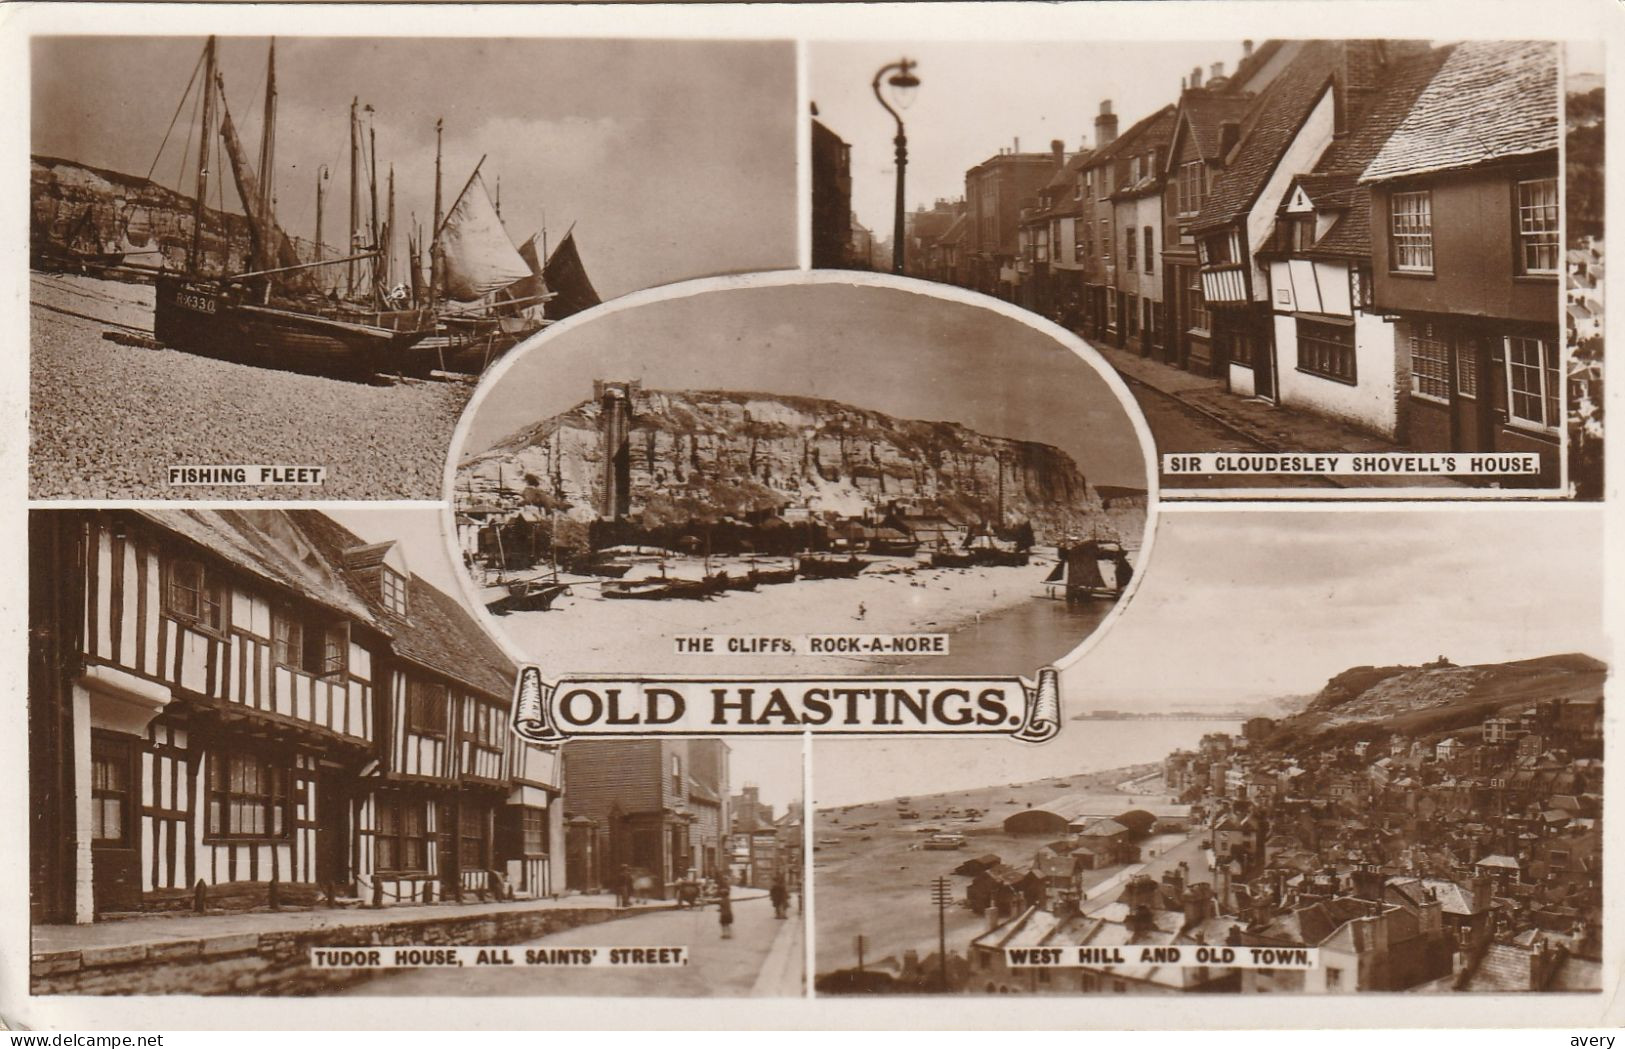 Old Hastings, East Sussex, England  R. P. P. C. Fishing Fleet The Cliffs, Rock-a-Nore Tudor House Shovell's House - Hastings